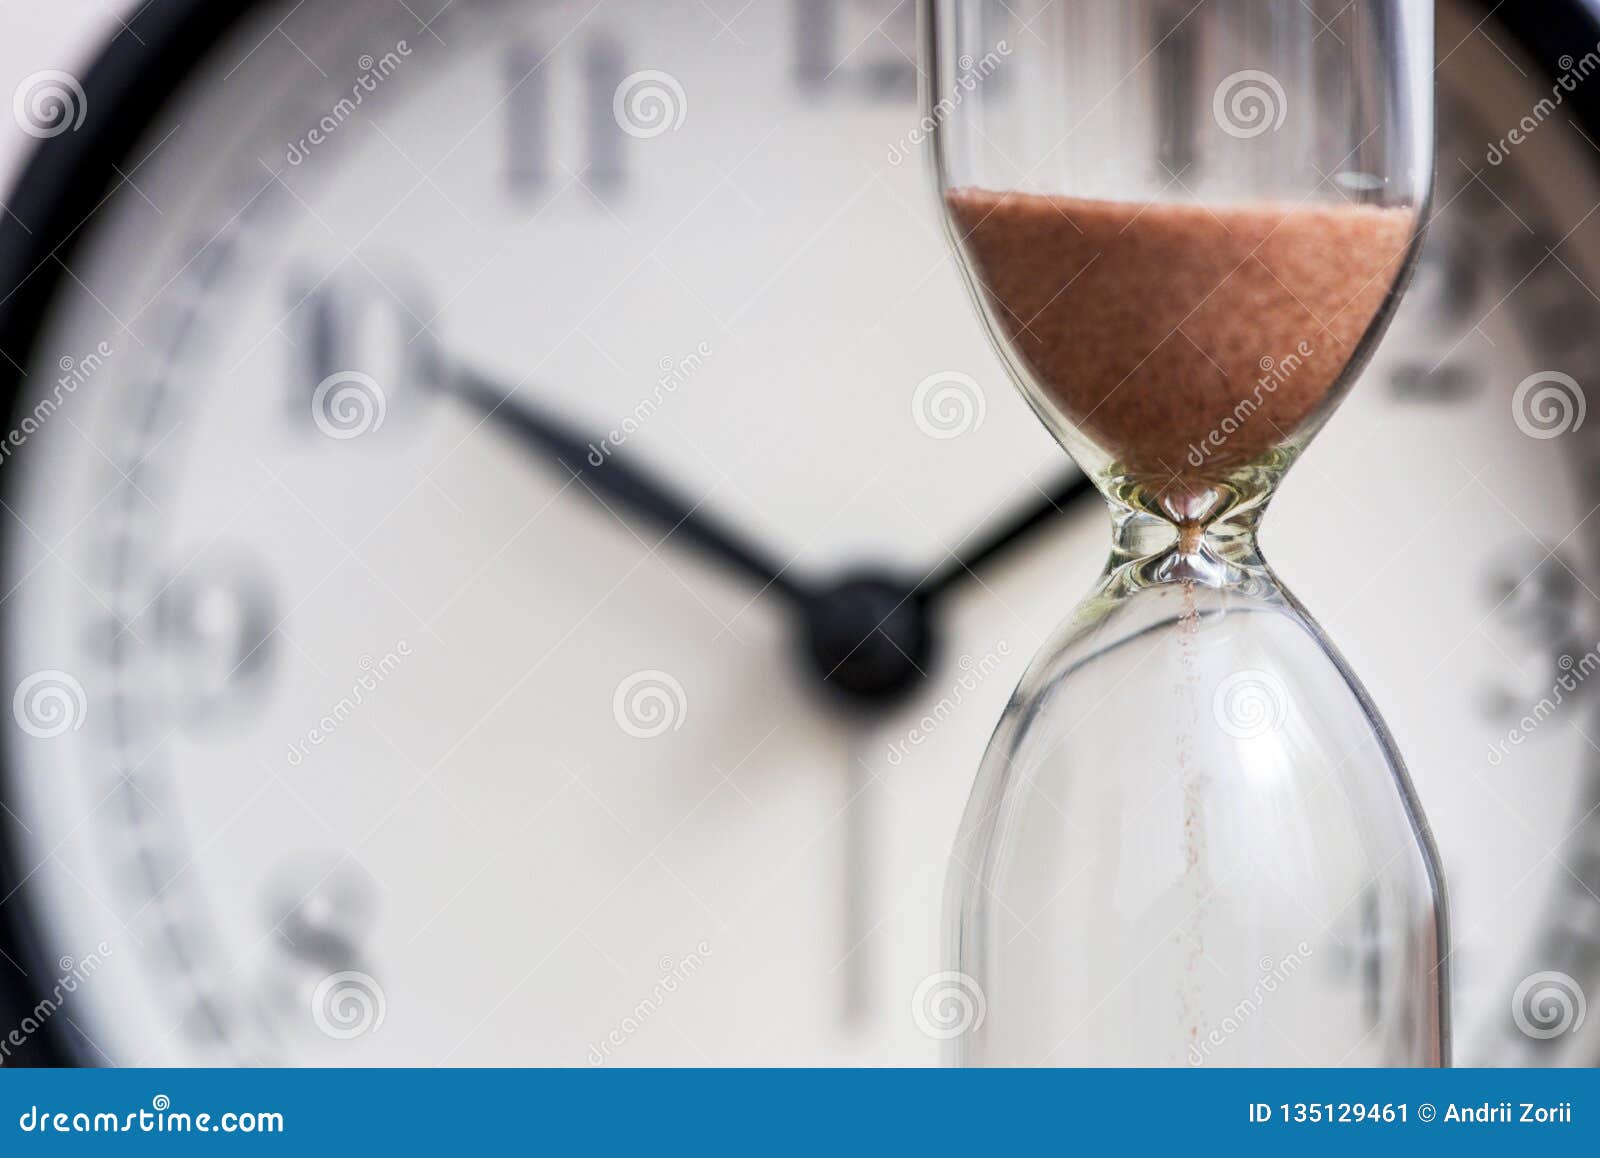 hourglass on the background of office watch as time passing concept for business deadline, urgency and running out of time. sand